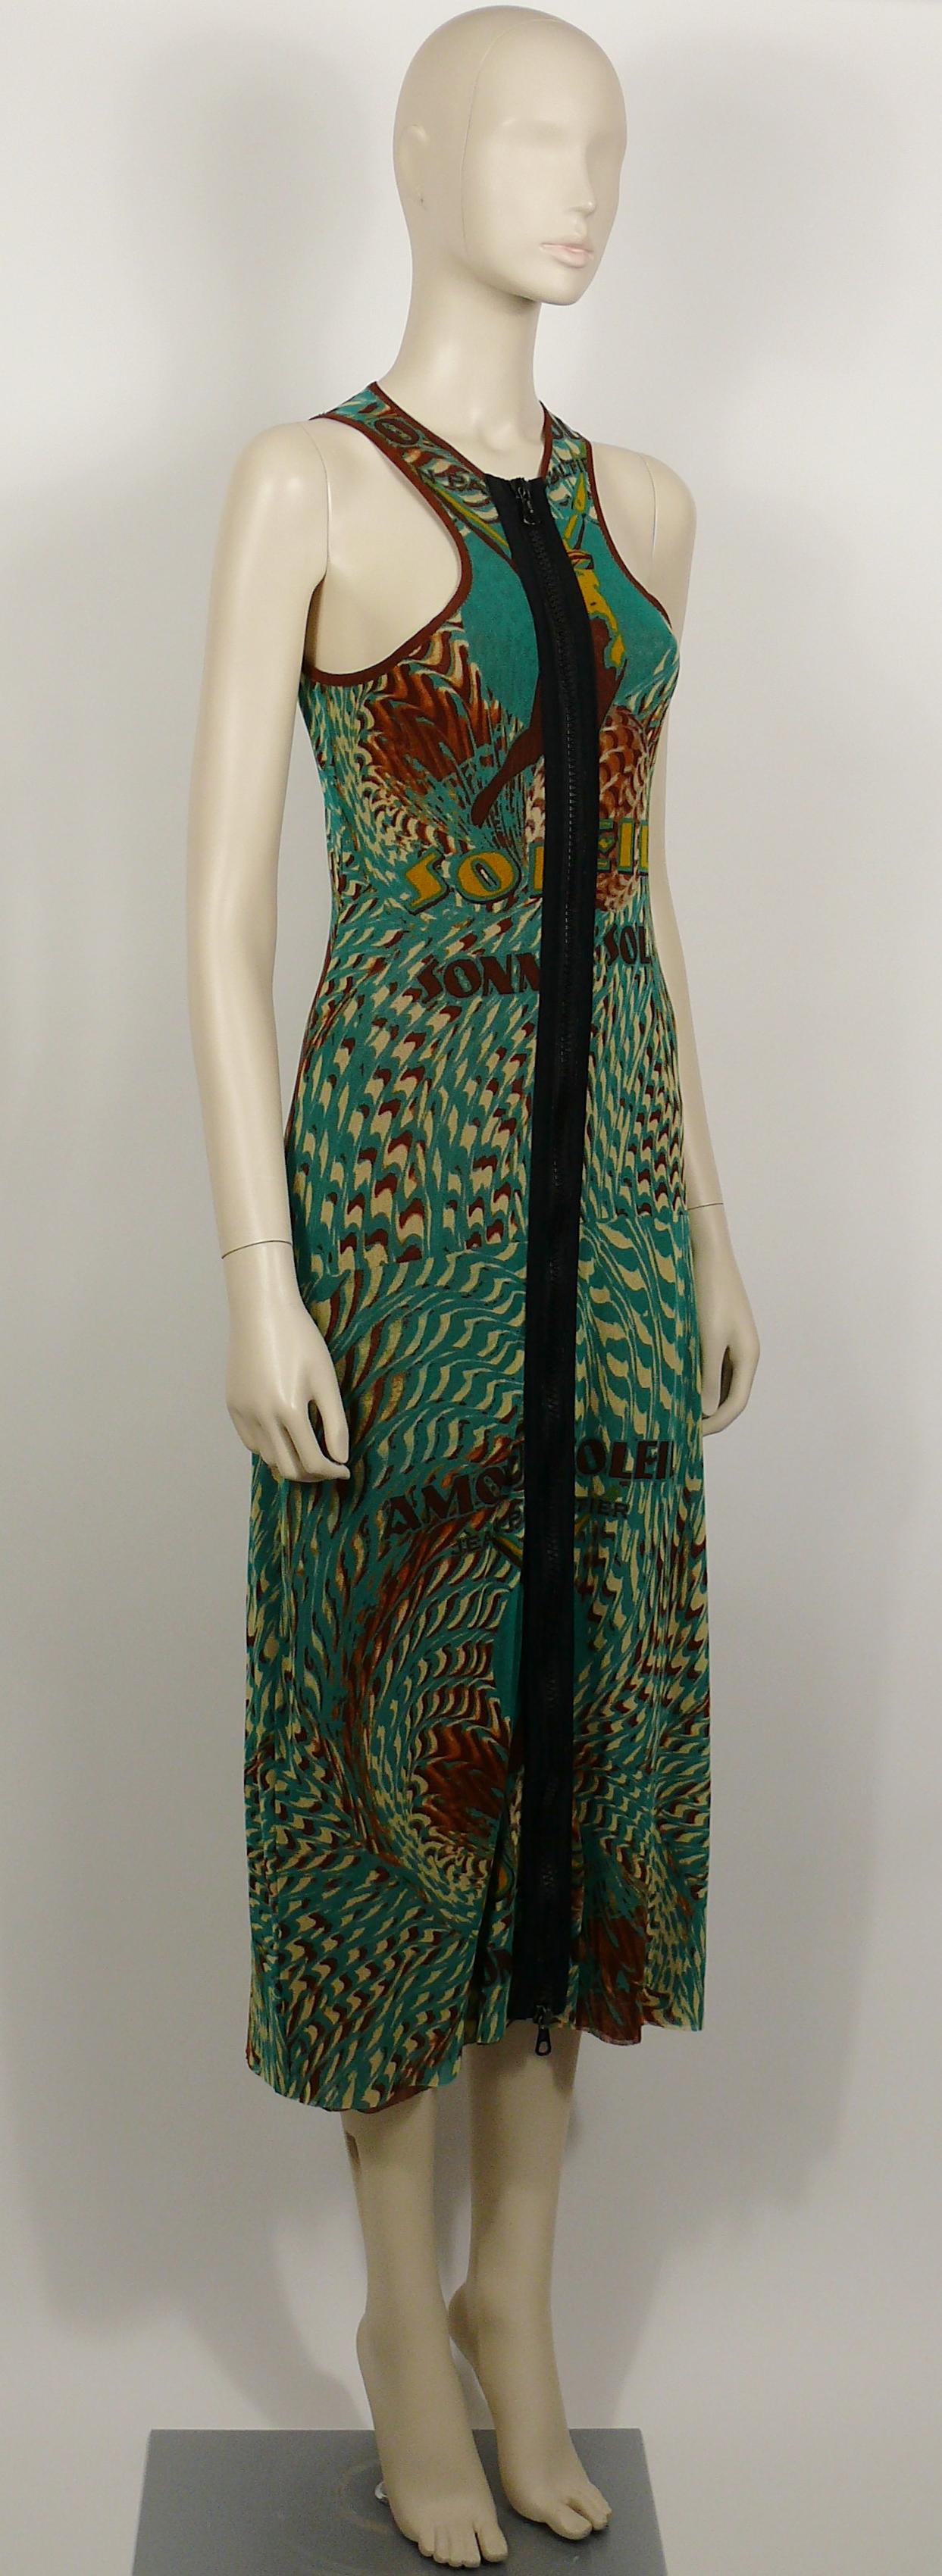 JEAN PAUL GAULTIER vintage zip front tank FUZZI mesh dress featuring a kinetic print with a female figure and Amour au Soleil (love in the sun), Soleil, Sonne, Sun, Sol, Jean Paul Gaultier...

Integrated brown mesh lining.

Label reads JEAN PAUL